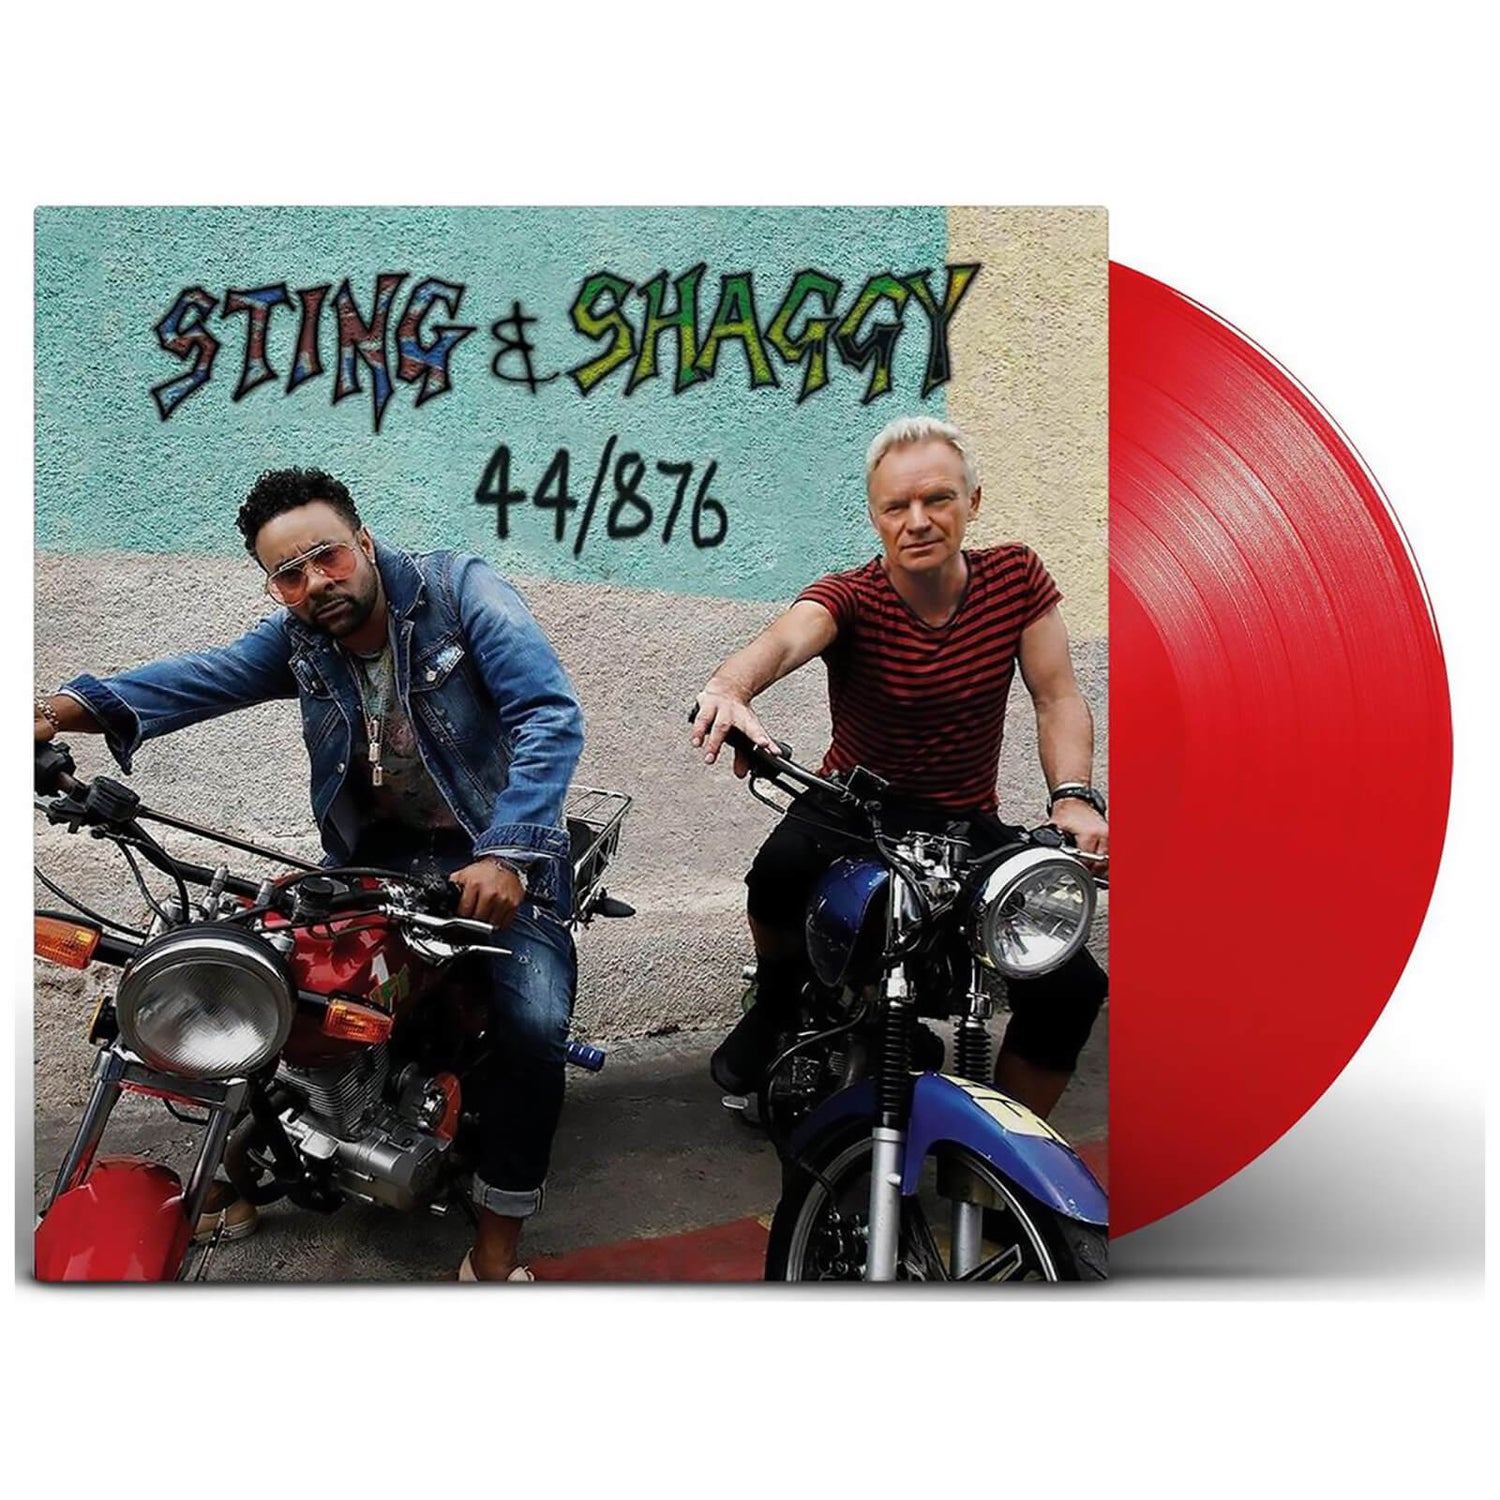 Sting & Shaggy - 44/876 (Limited Edition Red Vinyl)